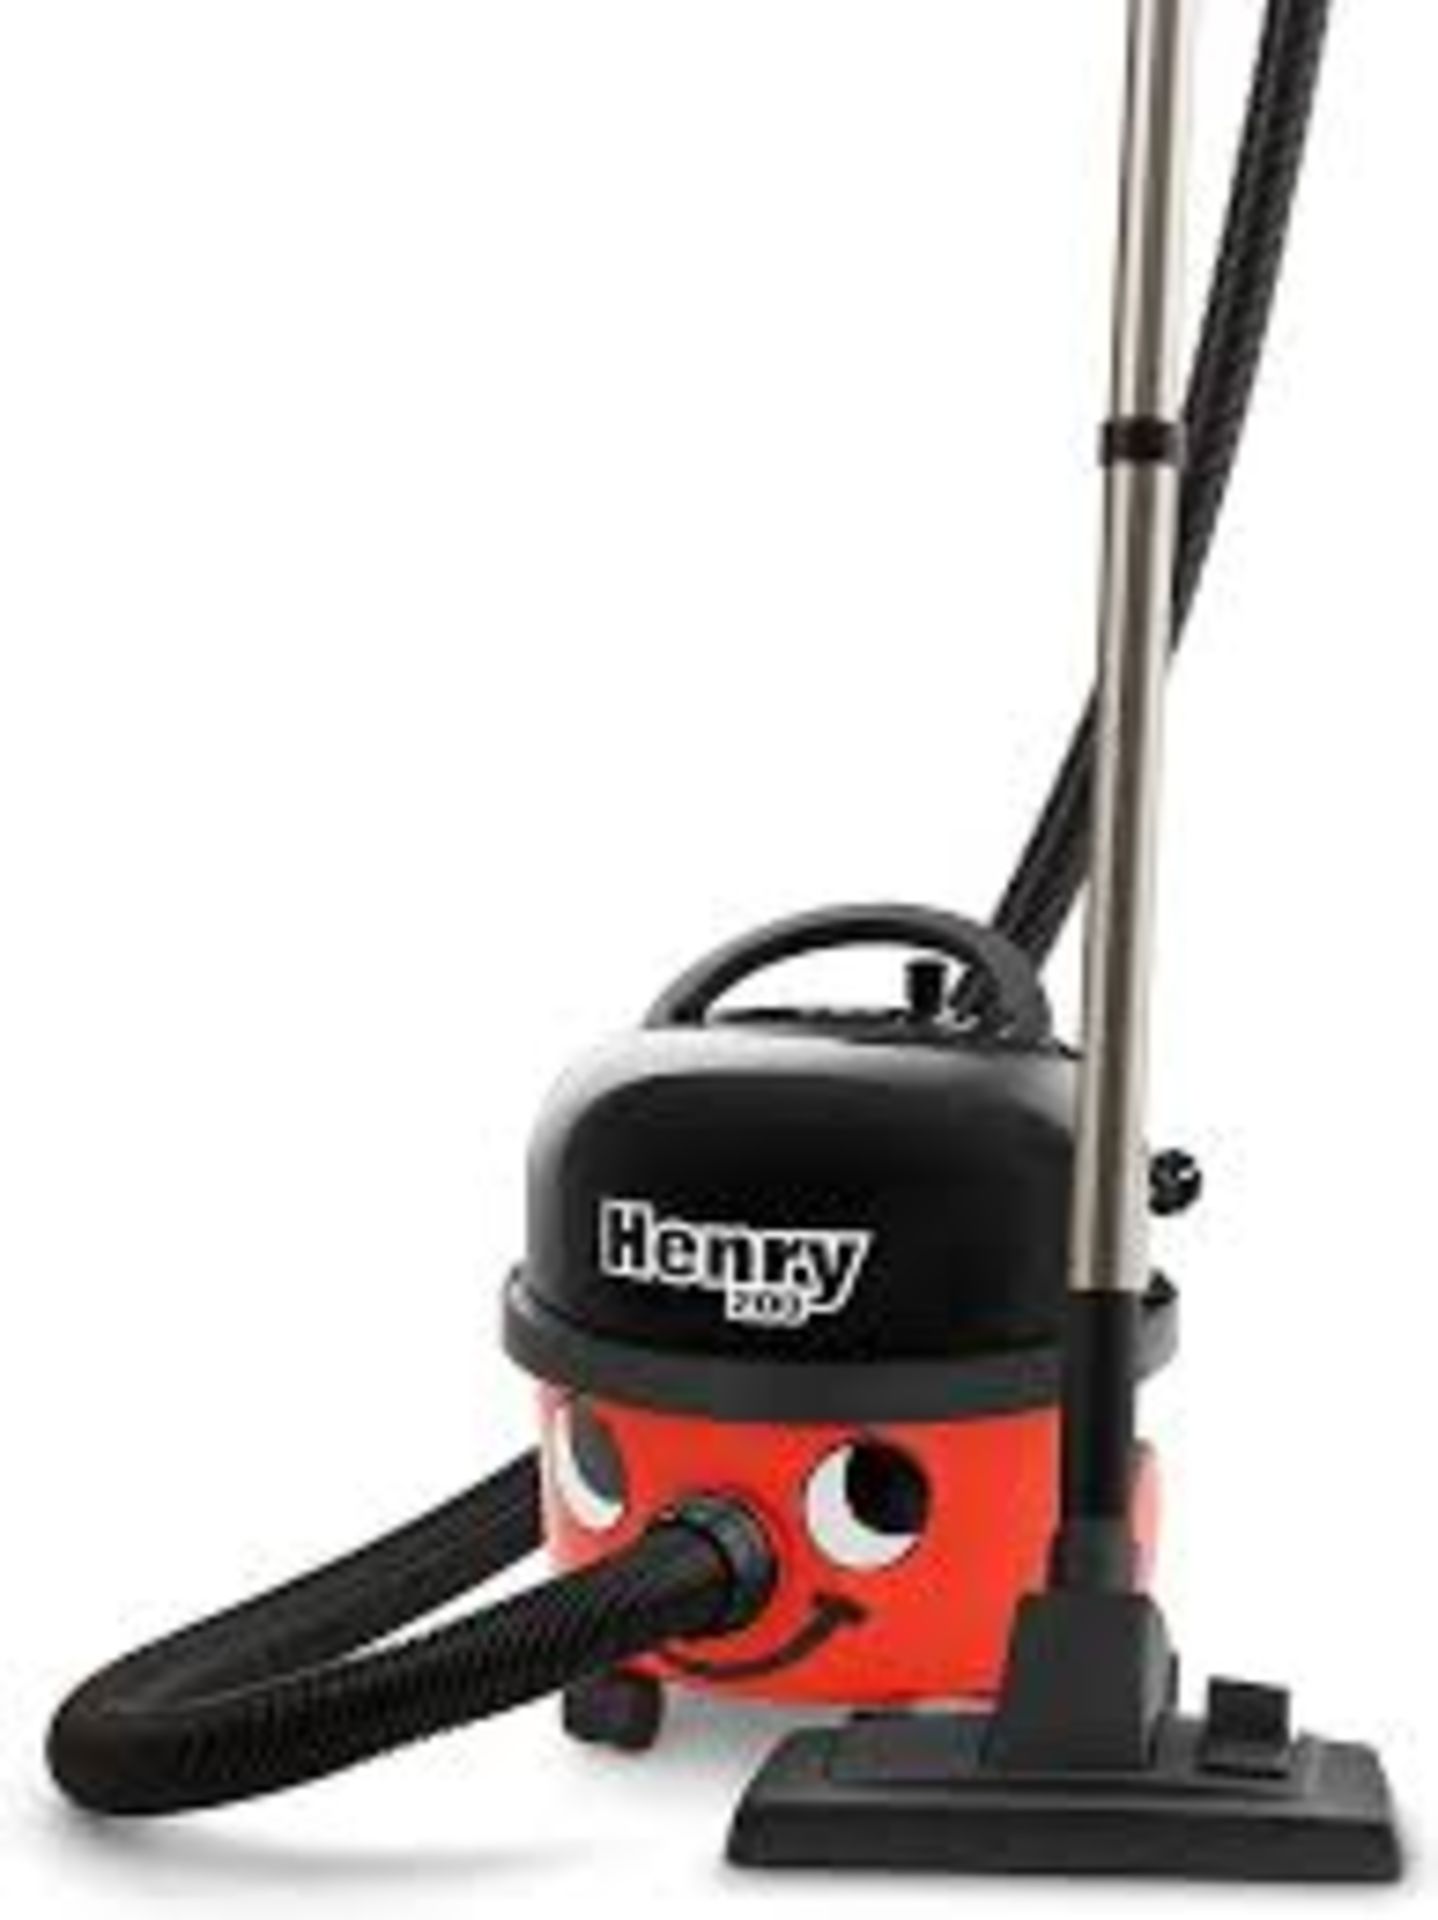 Numatic Henry HVR200 Corded Dry cylinder Vacuum cleaner 9L. - PW. With over 12 million made and most